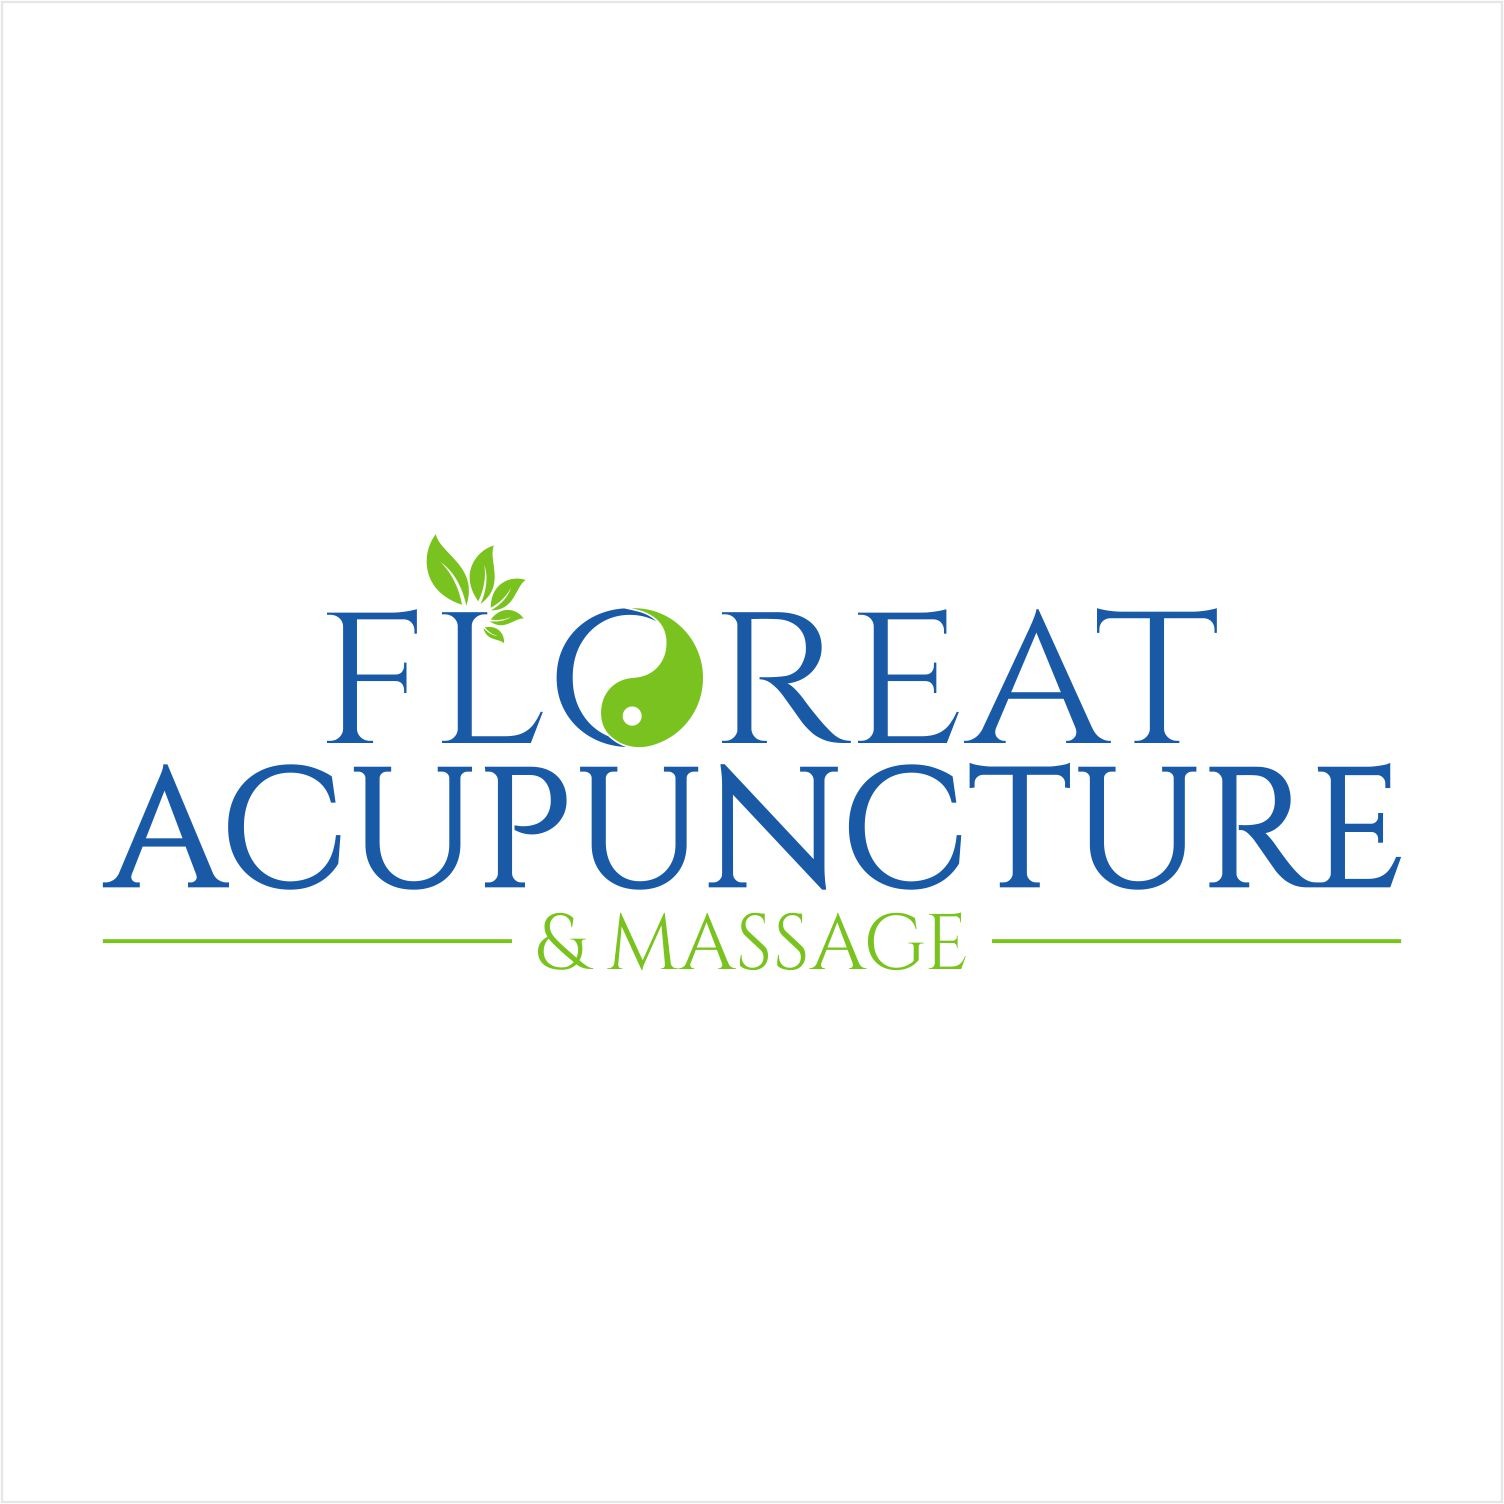 Discover the Benefits of Acupuncture: Our Comprehensive Services at Floreat Acupuncture - WelfulloutDoors.com